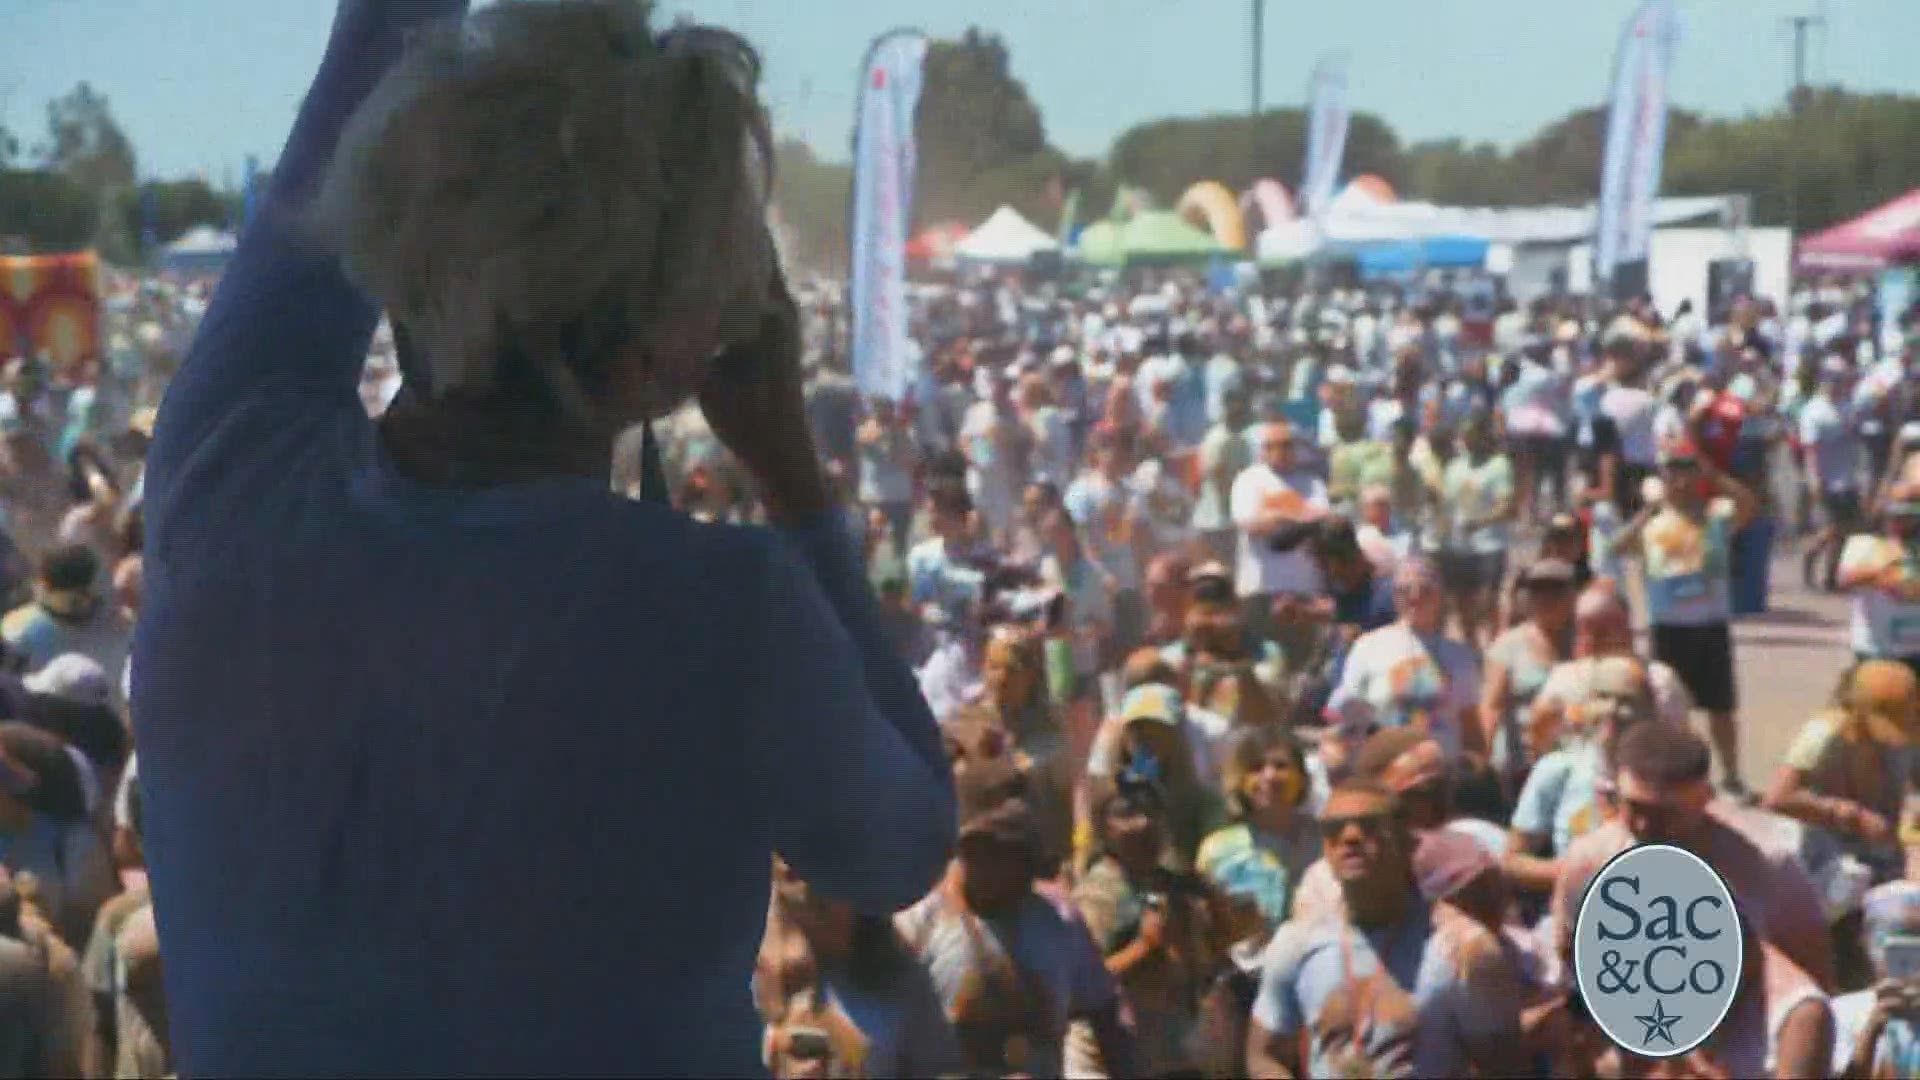 Australian Pop Star Betty Who, LG Electronics, and Amper music joined forces to create a motivational song at the color run in Los Angeles! The following is a paid segment sponsored by LG Electronics and Amper Music.